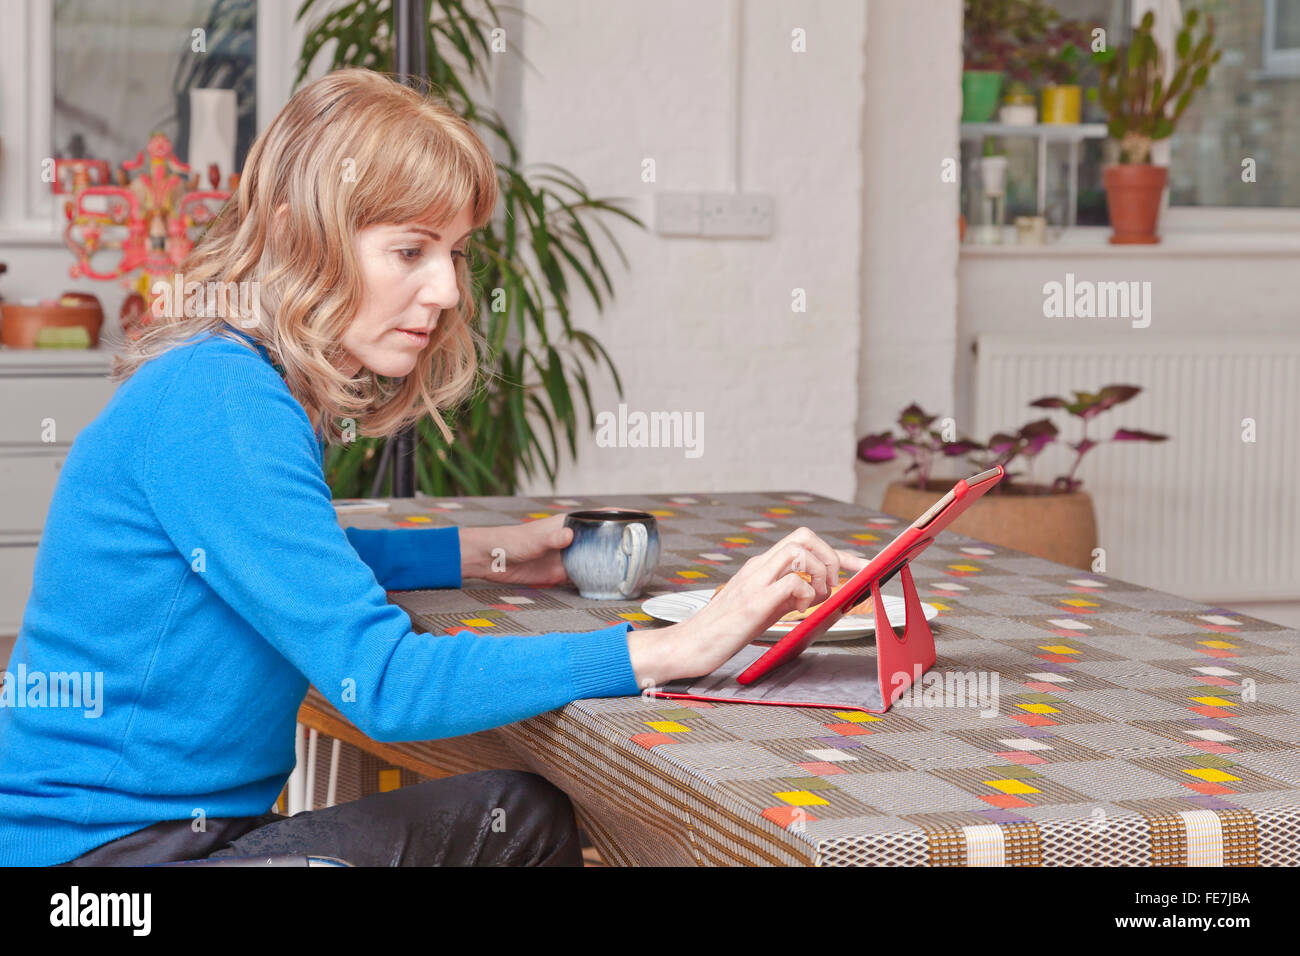 Woman using an iPad at a living room table. Stock Photo